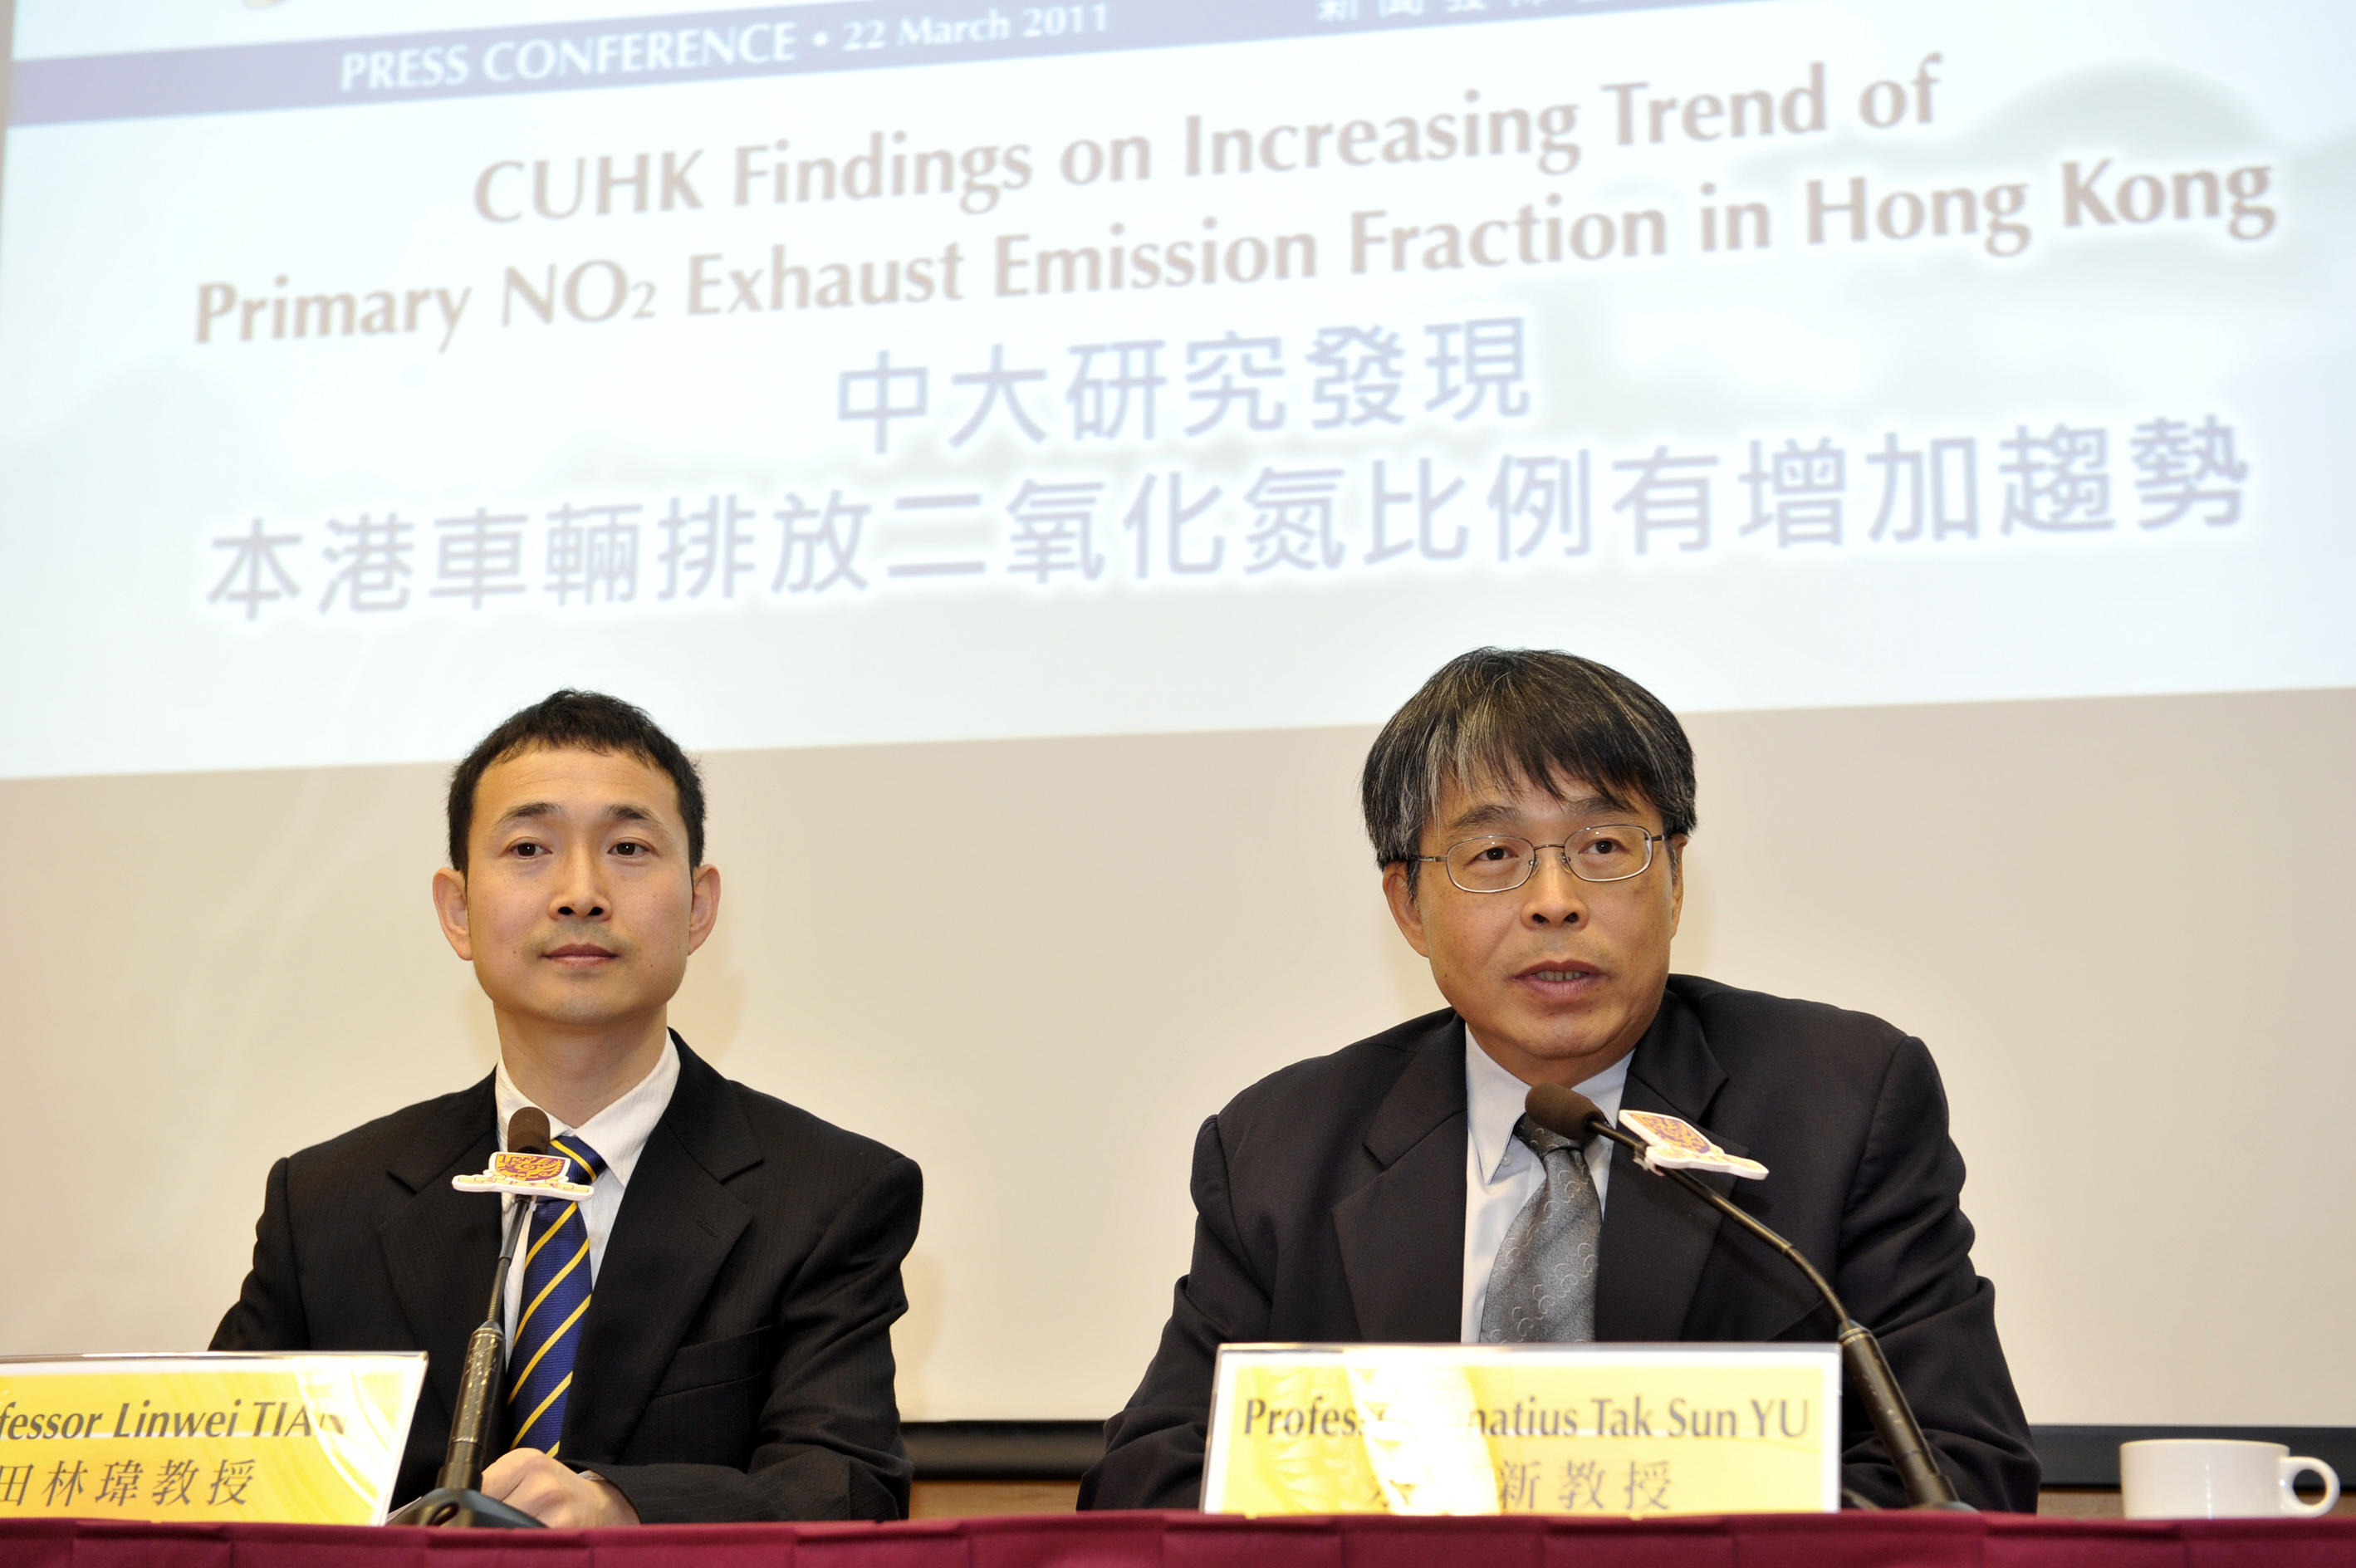 Prof. Linwei TIAN (left), Assistant Professor, and Prof. Ignatius Tak Sun YU, Head of Division, Division of Occupational and Environmental Health, School of Public Health and Primary Care, CUHK